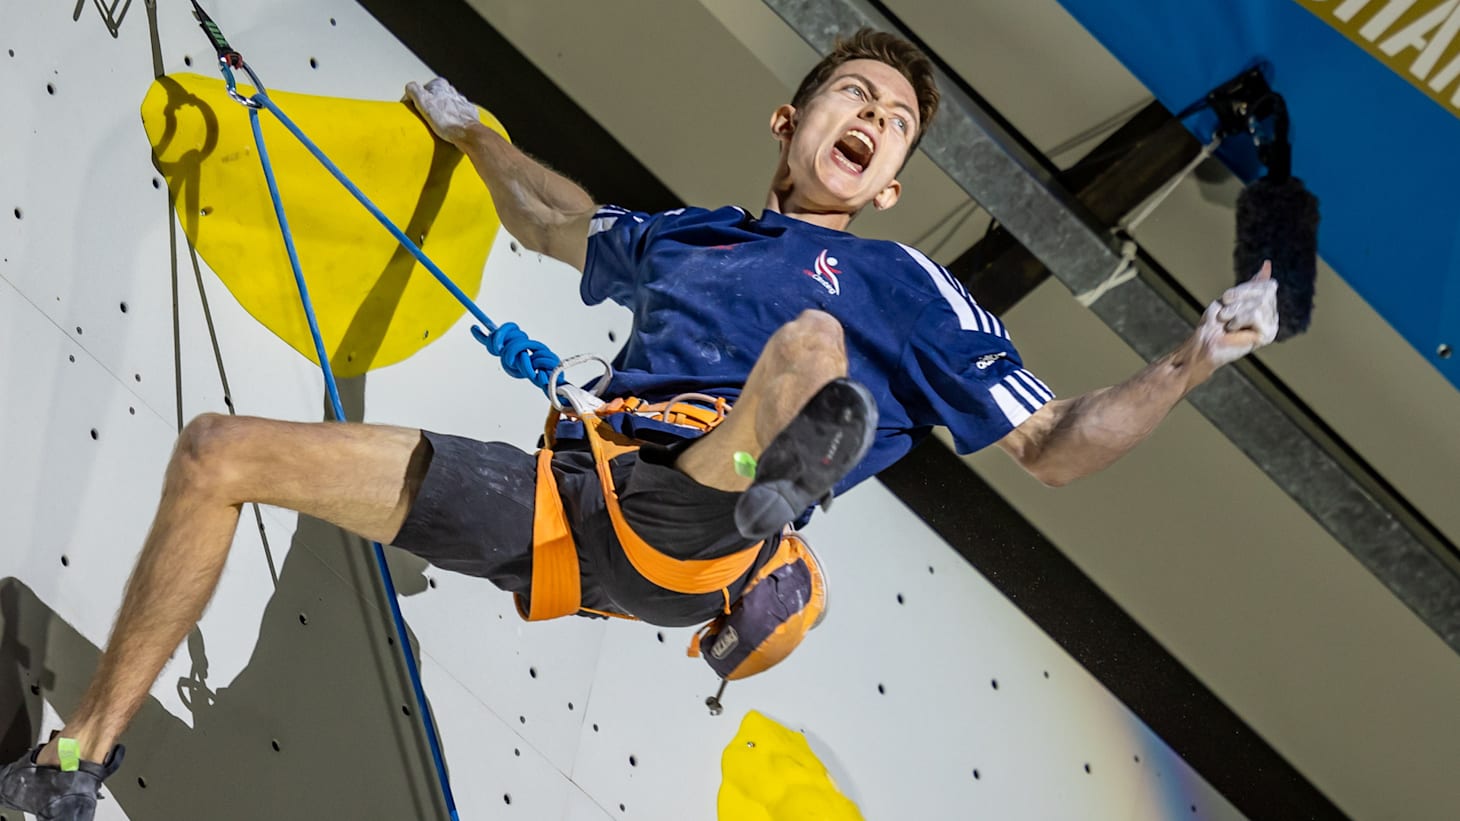 Sport climbing - Britain's teenage sensation Toby Roberts: There's never  been a day where I didn't want to go climbing